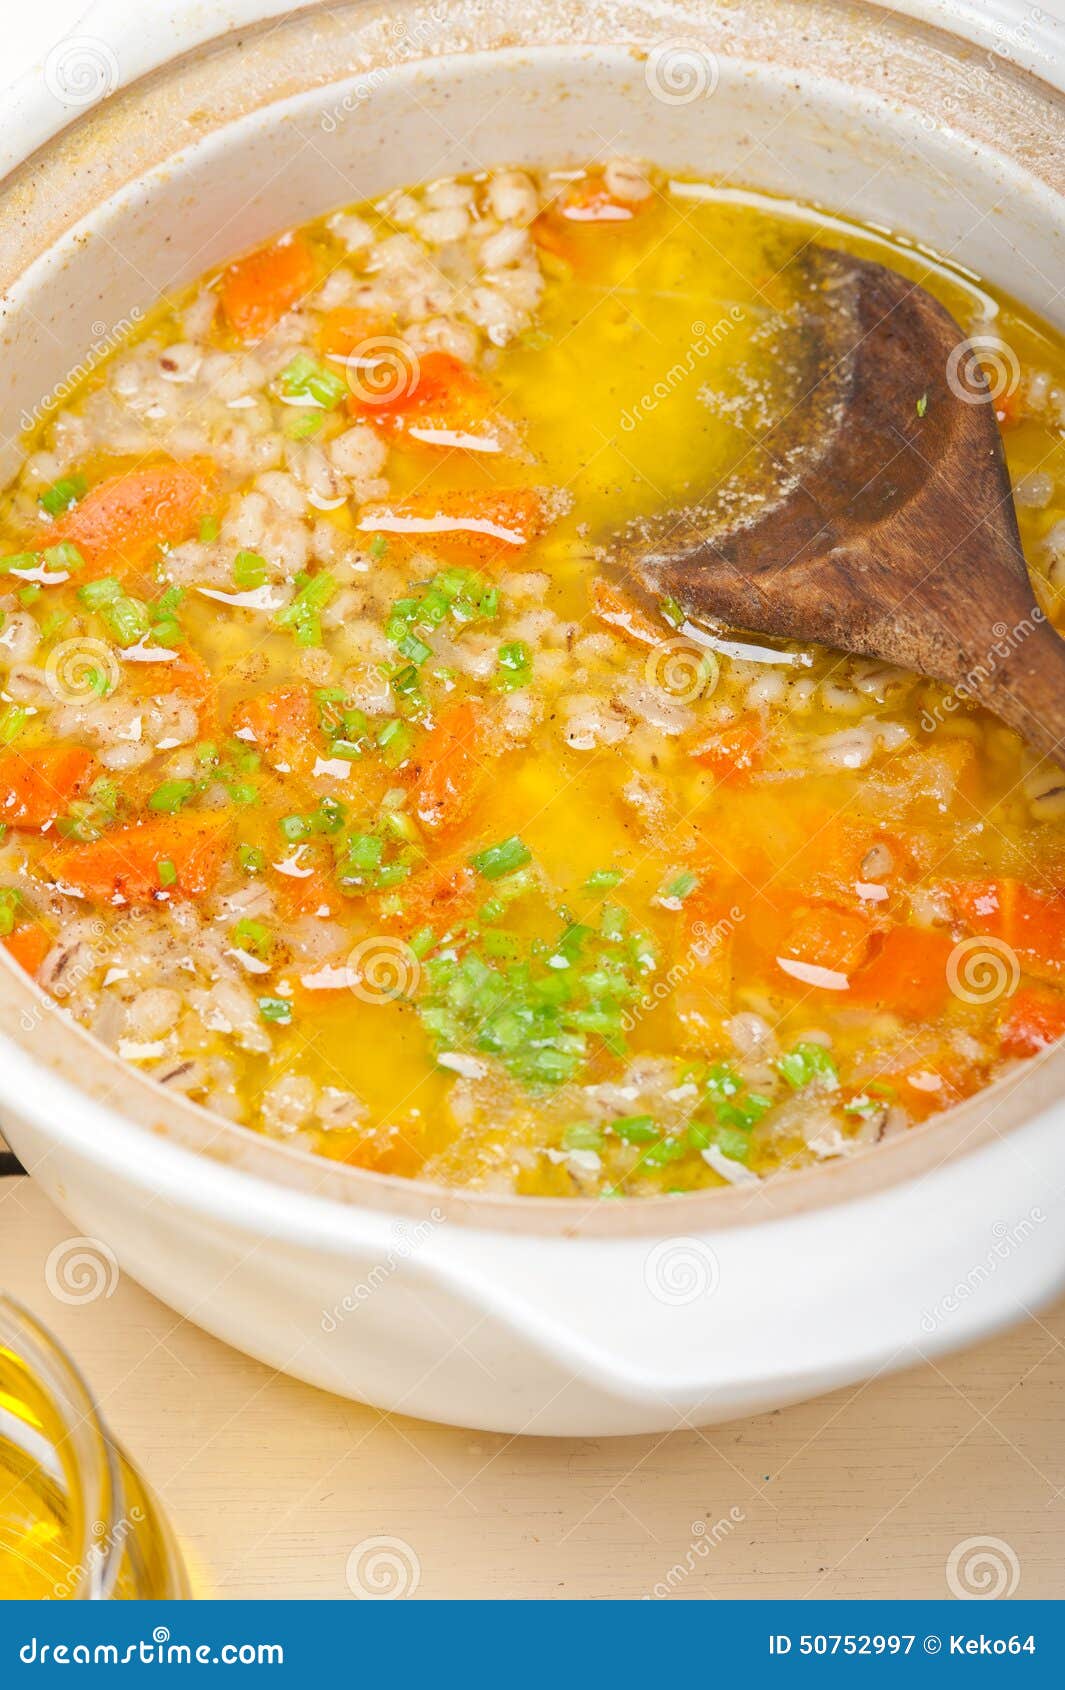 Syrian Barley Broth Soup Aleppo Style Stock Image - Image of appetizer ...